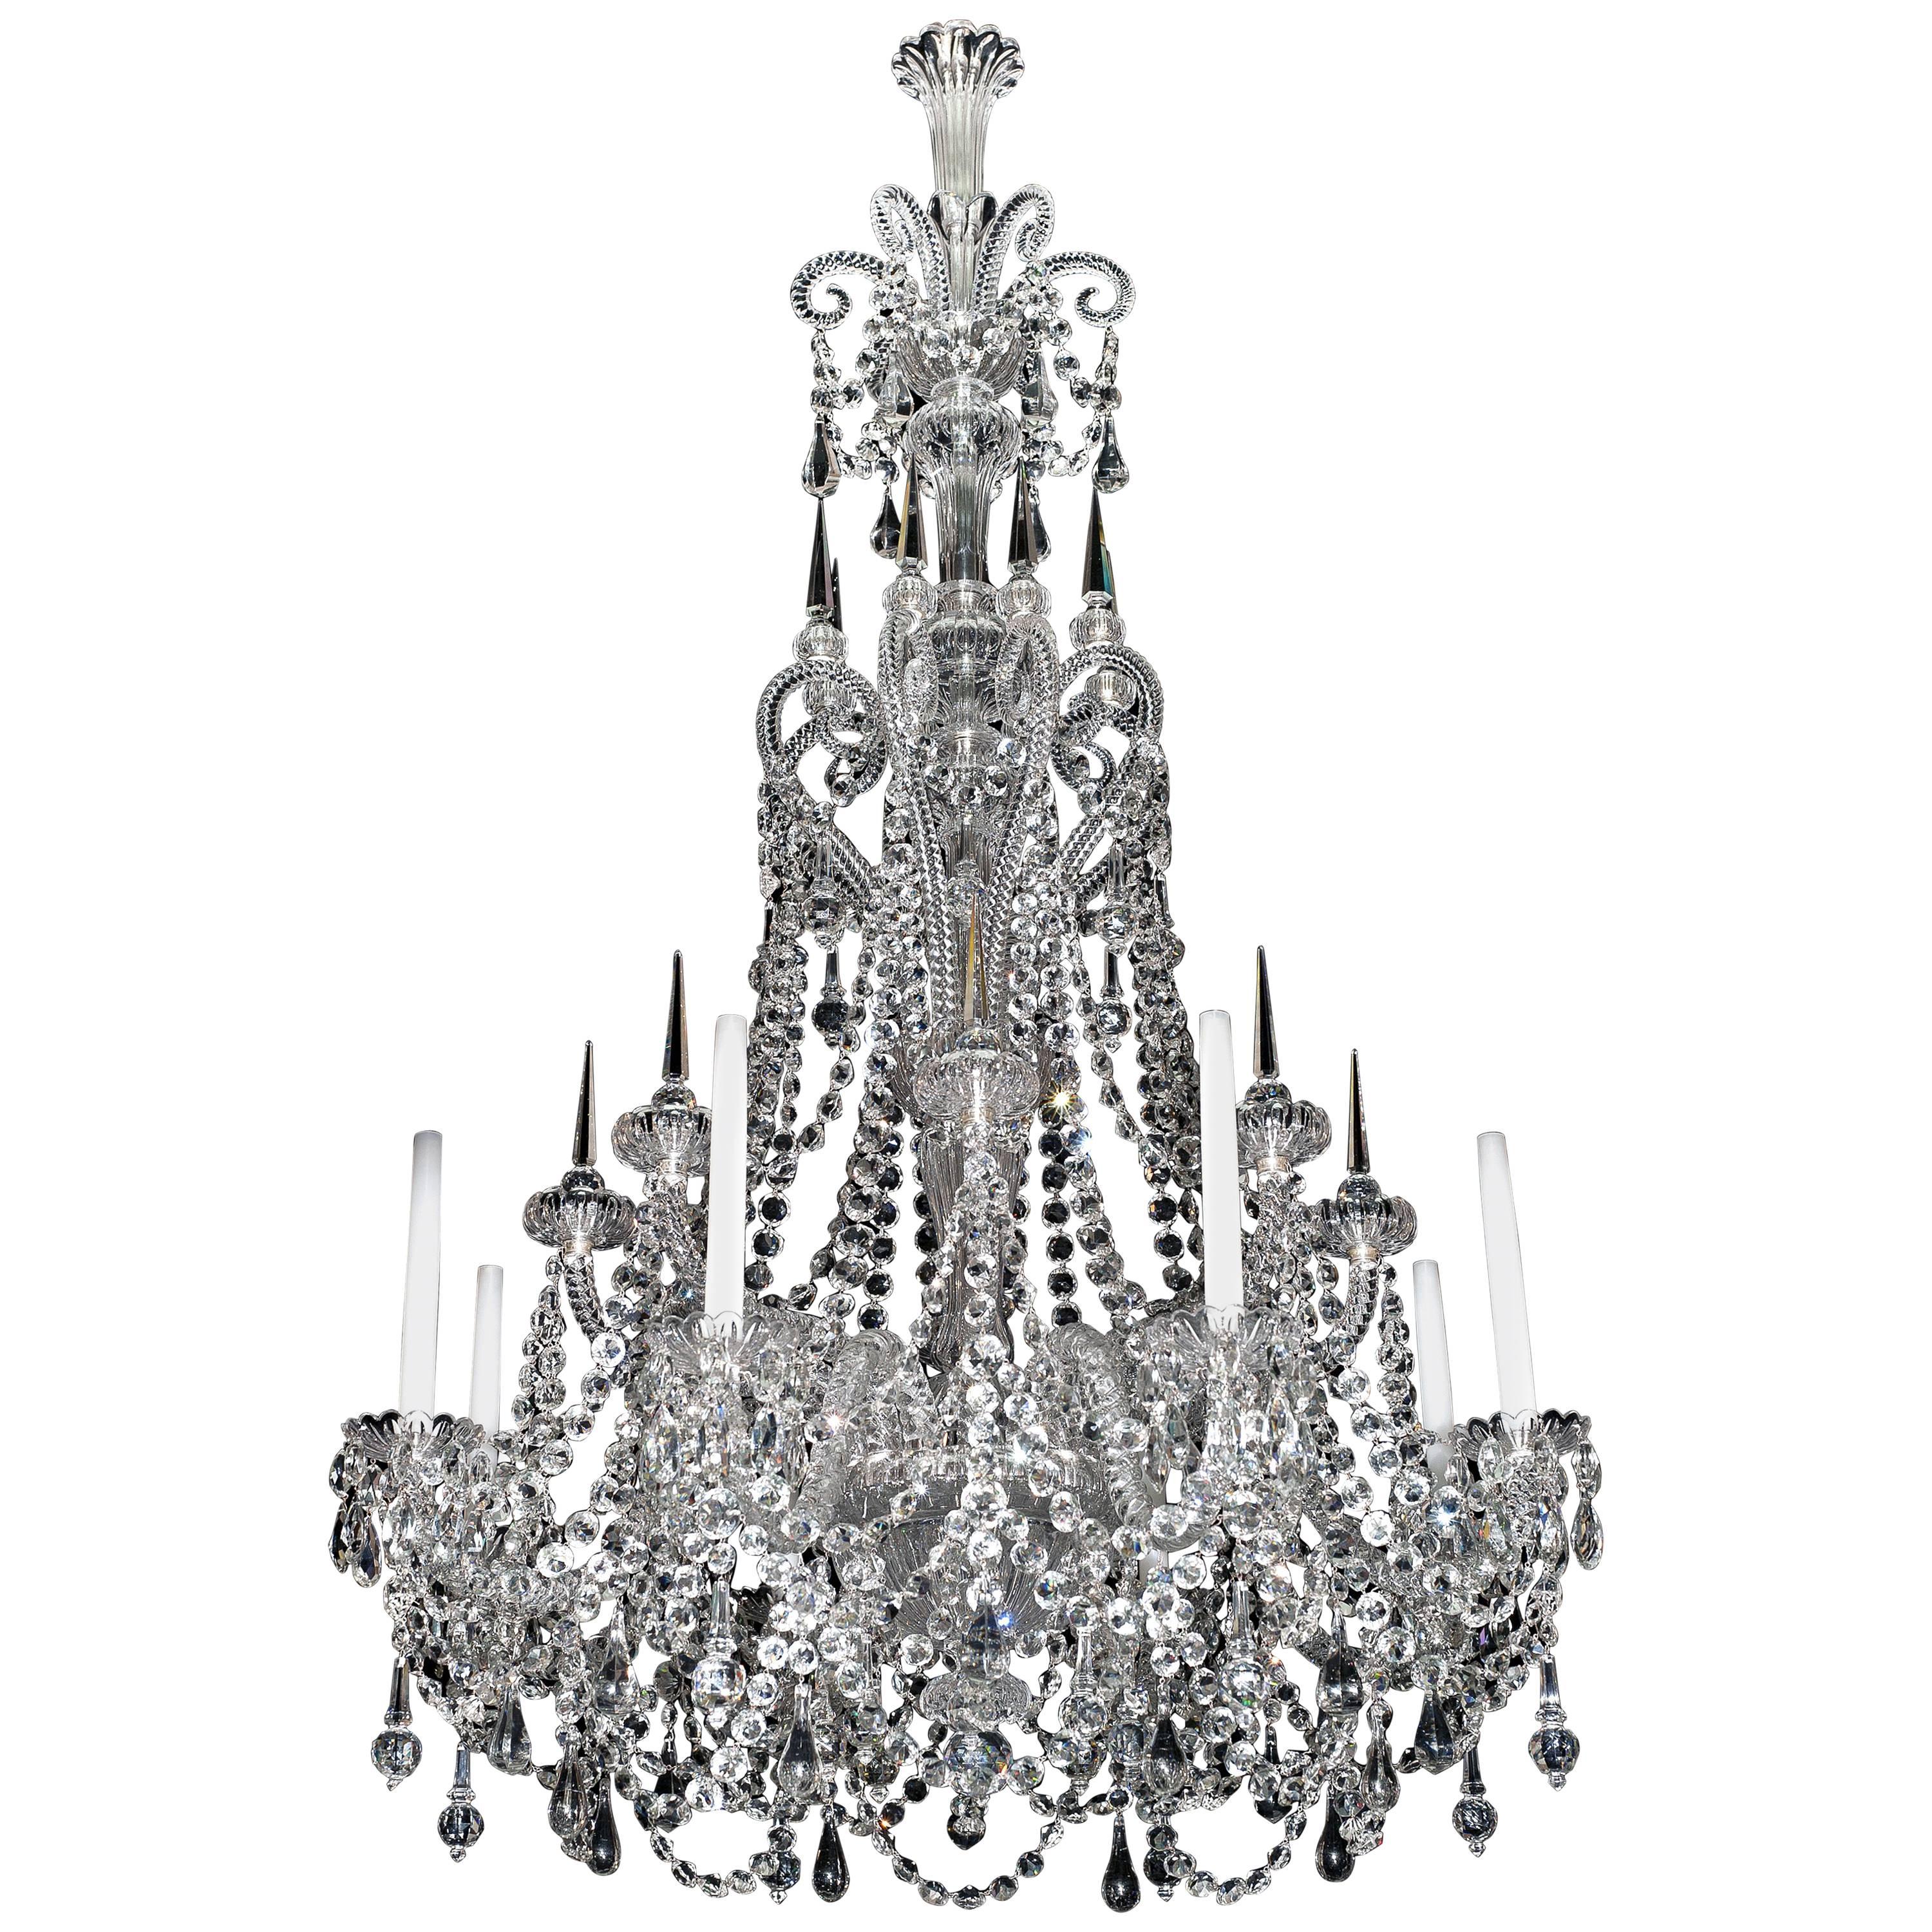 Fine Quality Eight Light Cut-Glass Antique Chandelier by F&C Osler